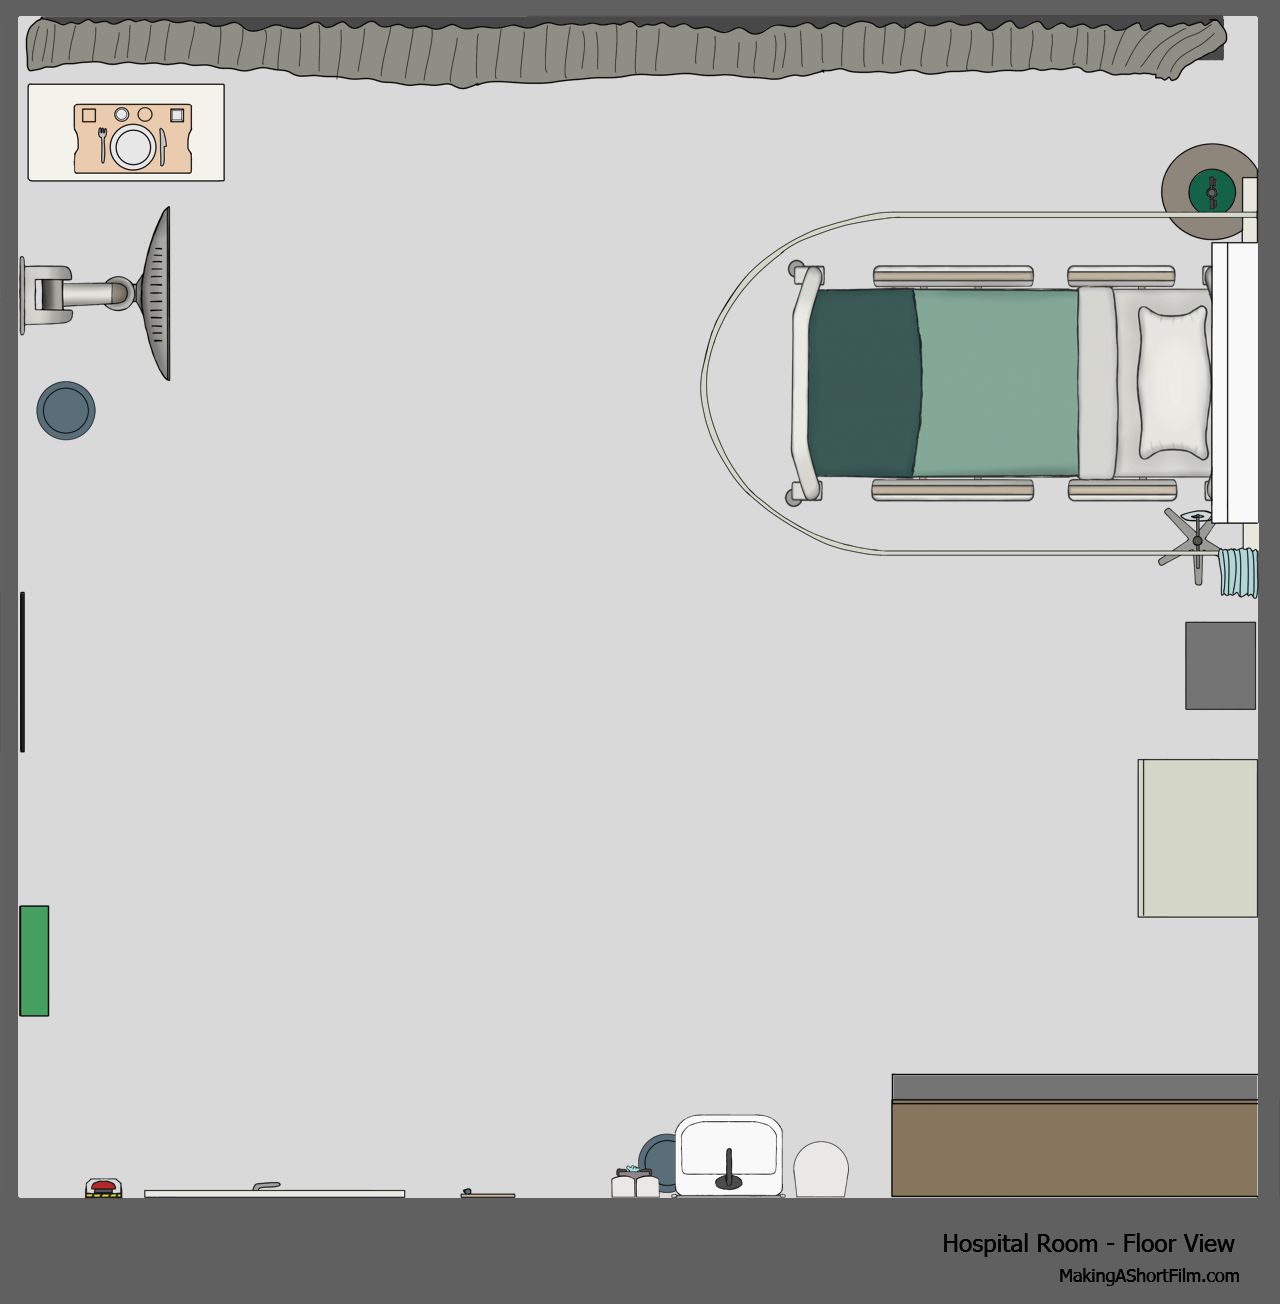 The finished concept art of the floor of the hospital room